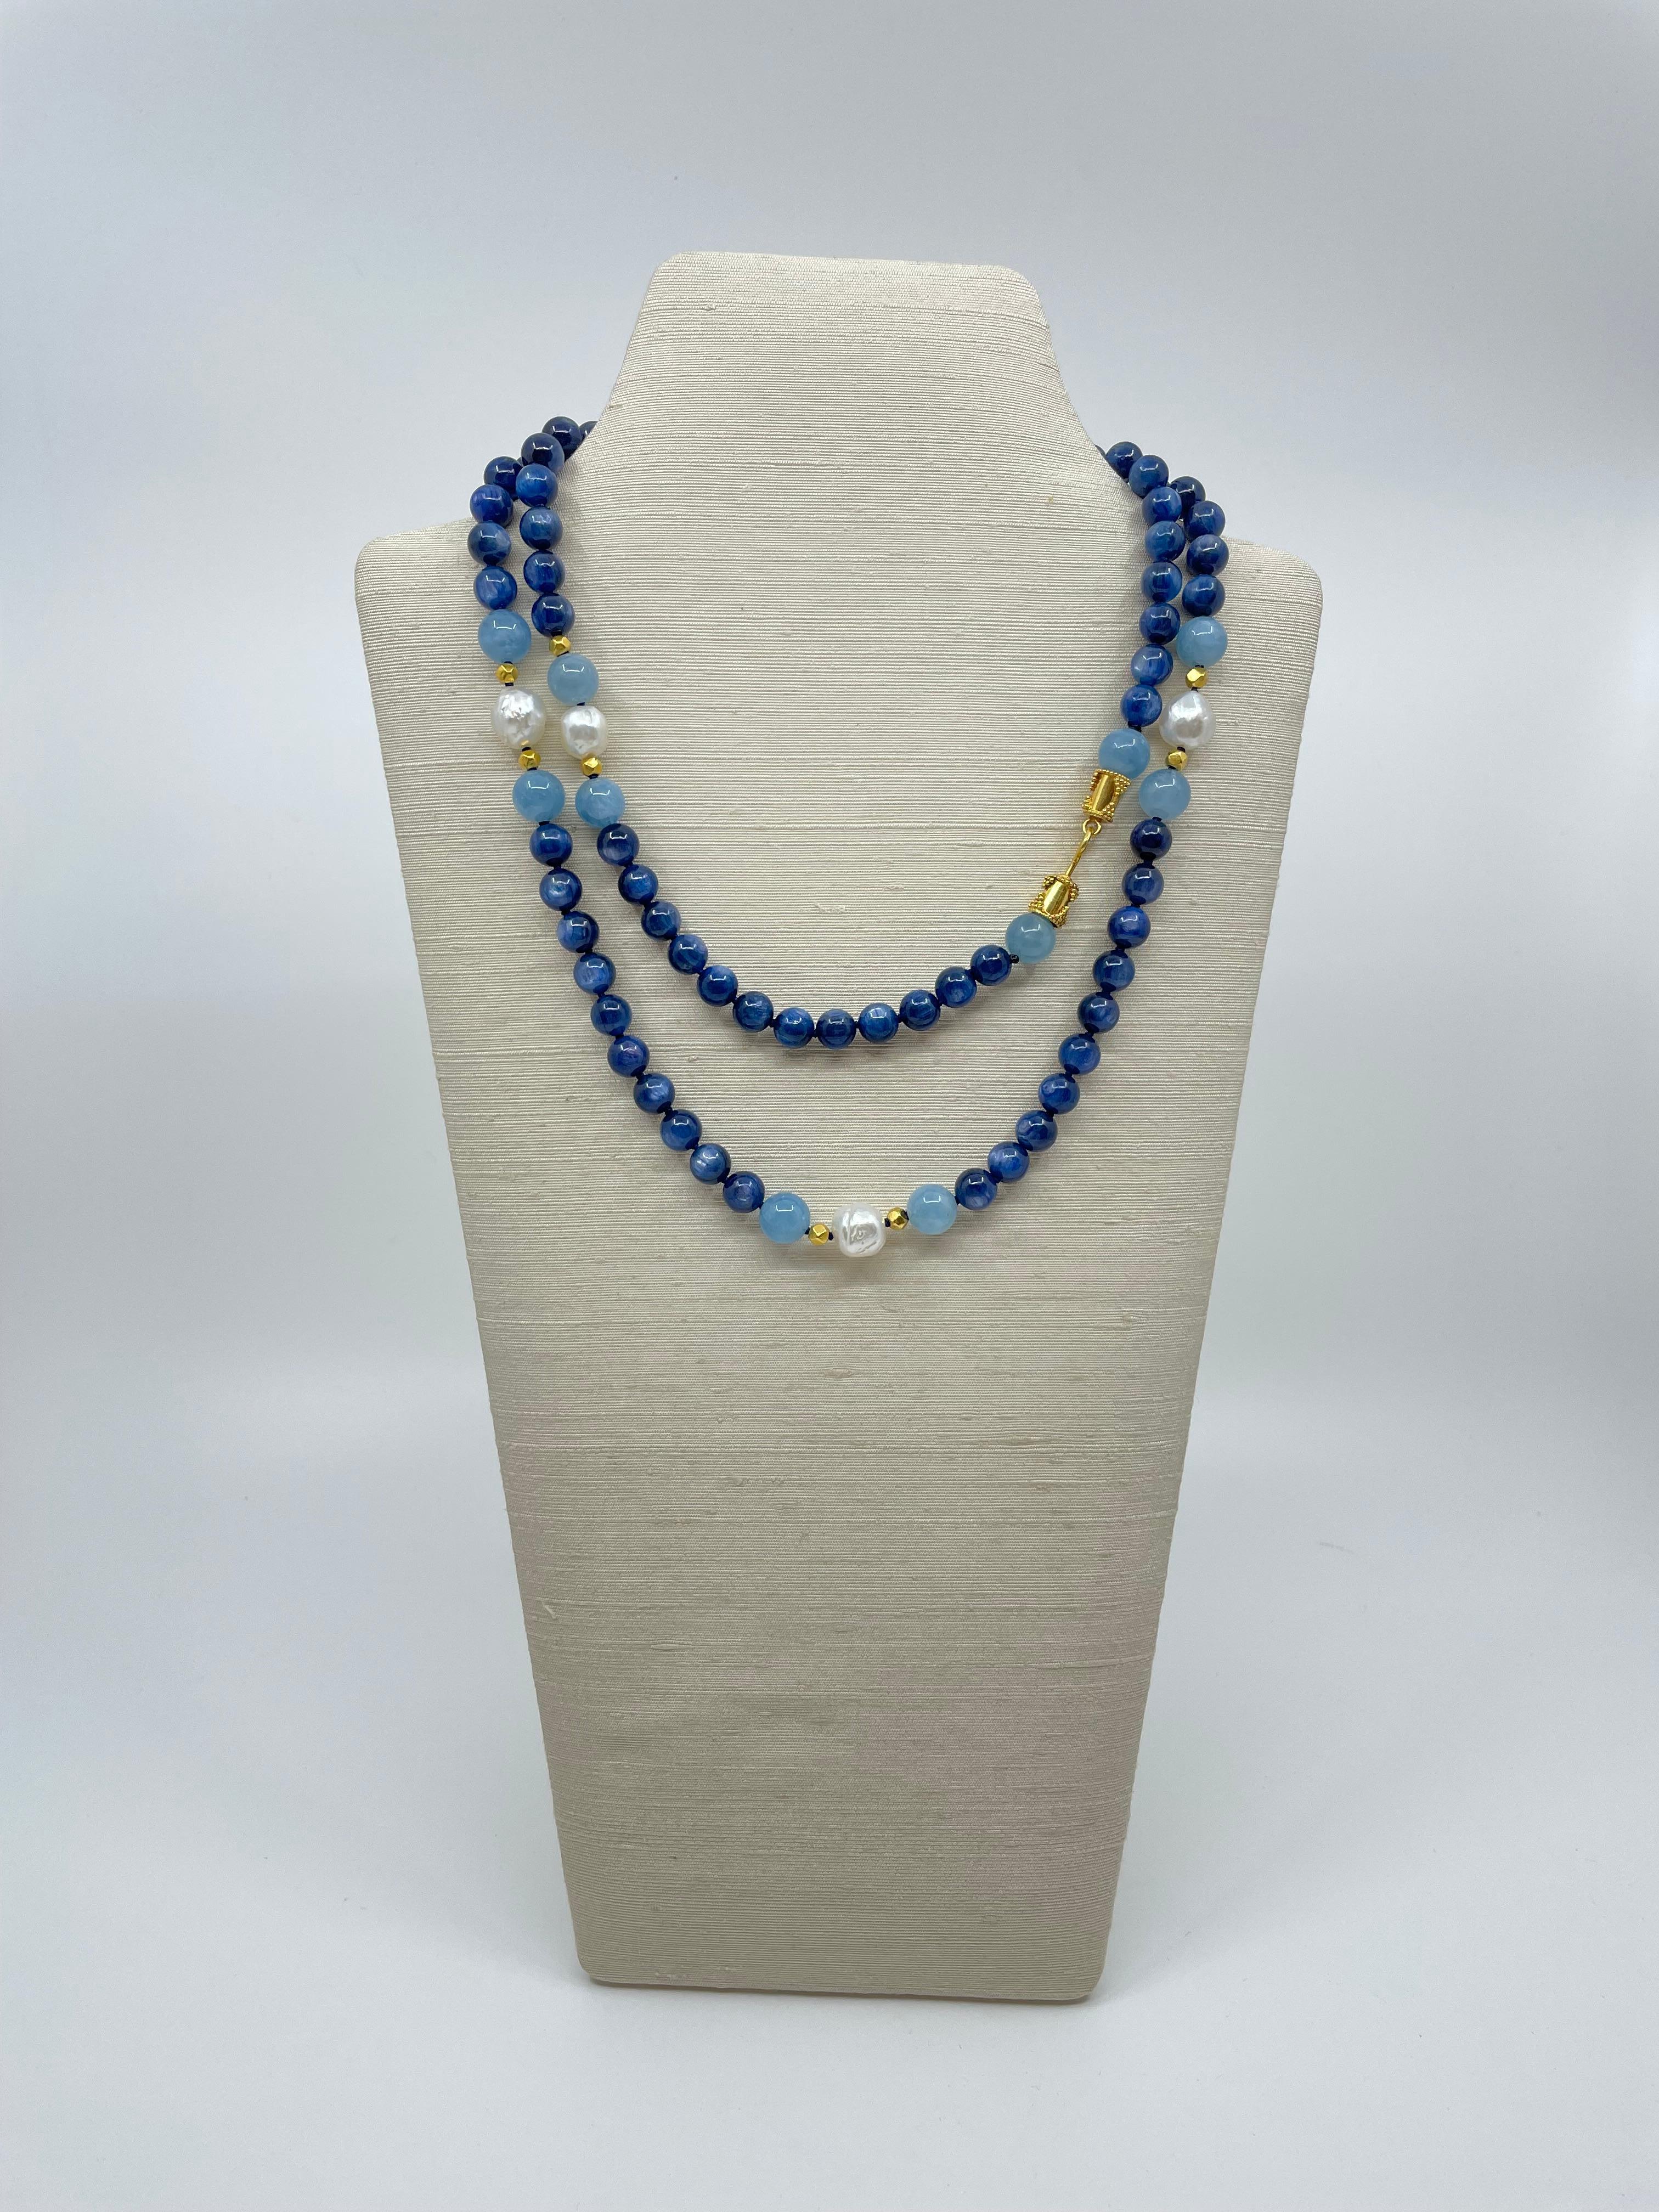 Long Necklace with Kyanite, Aquamarine, South Sea Pearls & 18K Solid Gold Beads For Sale 3